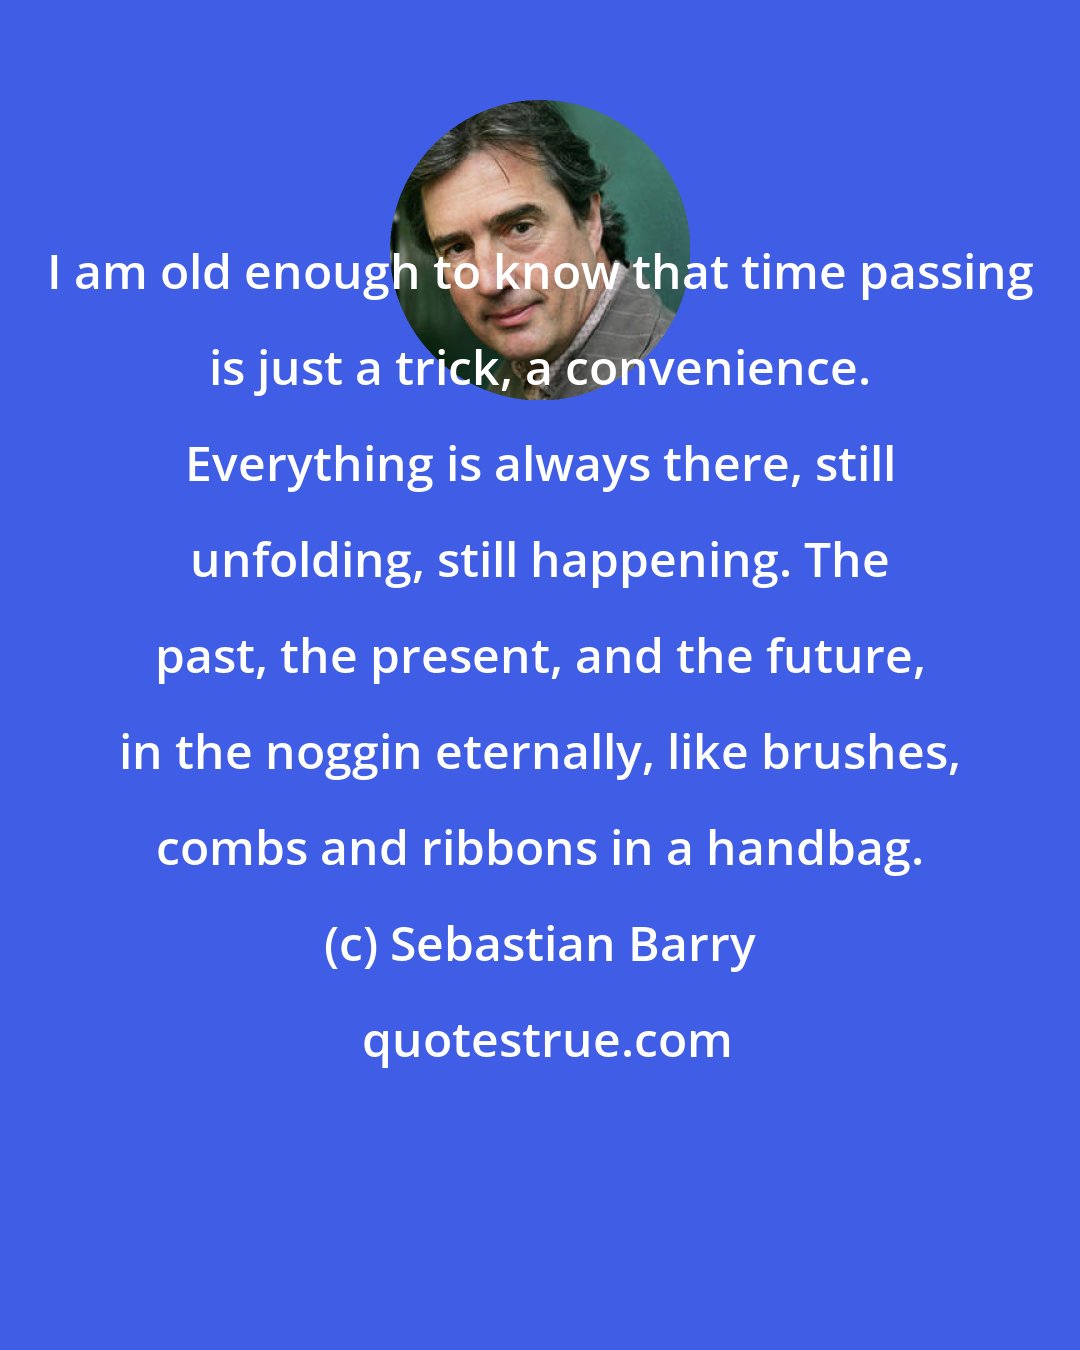 Sebastian Barry: I am old enough to know that time passing is just a trick, a convenience. Everything is always there, still unfolding, still happening. The past, the present, and the future, in the noggin eternally, like brushes, combs and ribbons in a handbag.